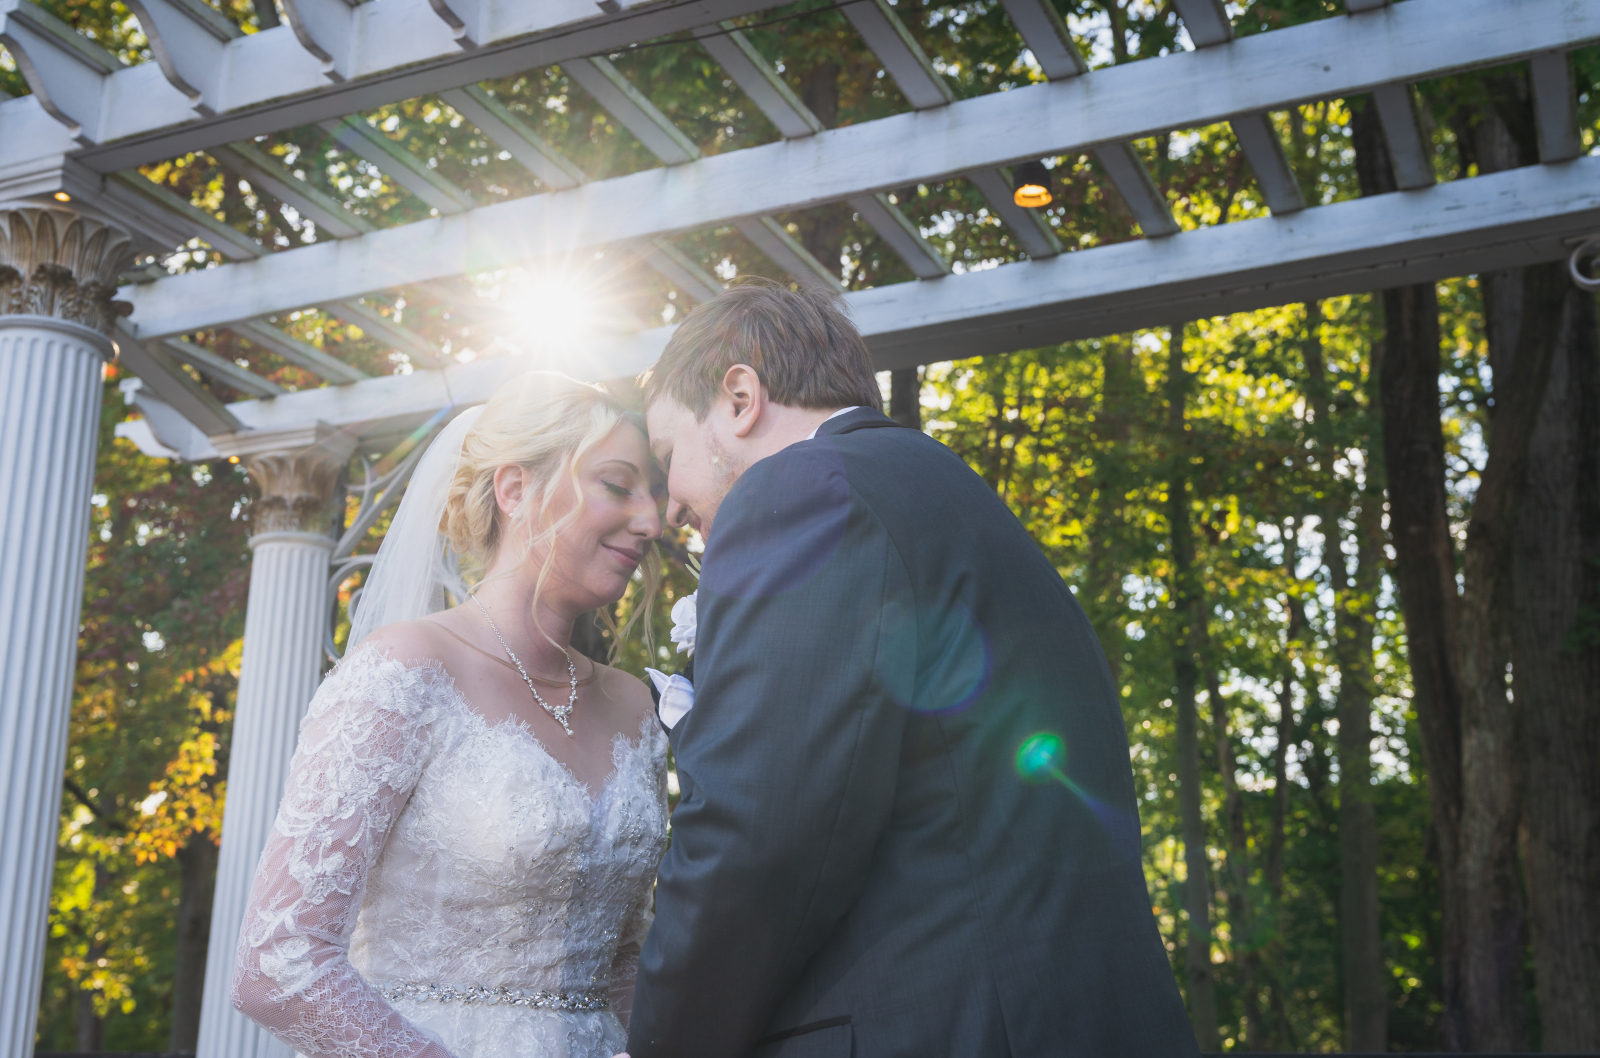 Bride and groom wedding portrait, couple portrait, sweet, sunlight, lens flare, wooden arch with columns, green, nature, trees, fall wedding, cute outdoor wedding ceremony at Grand Pacific Wedding Gardens